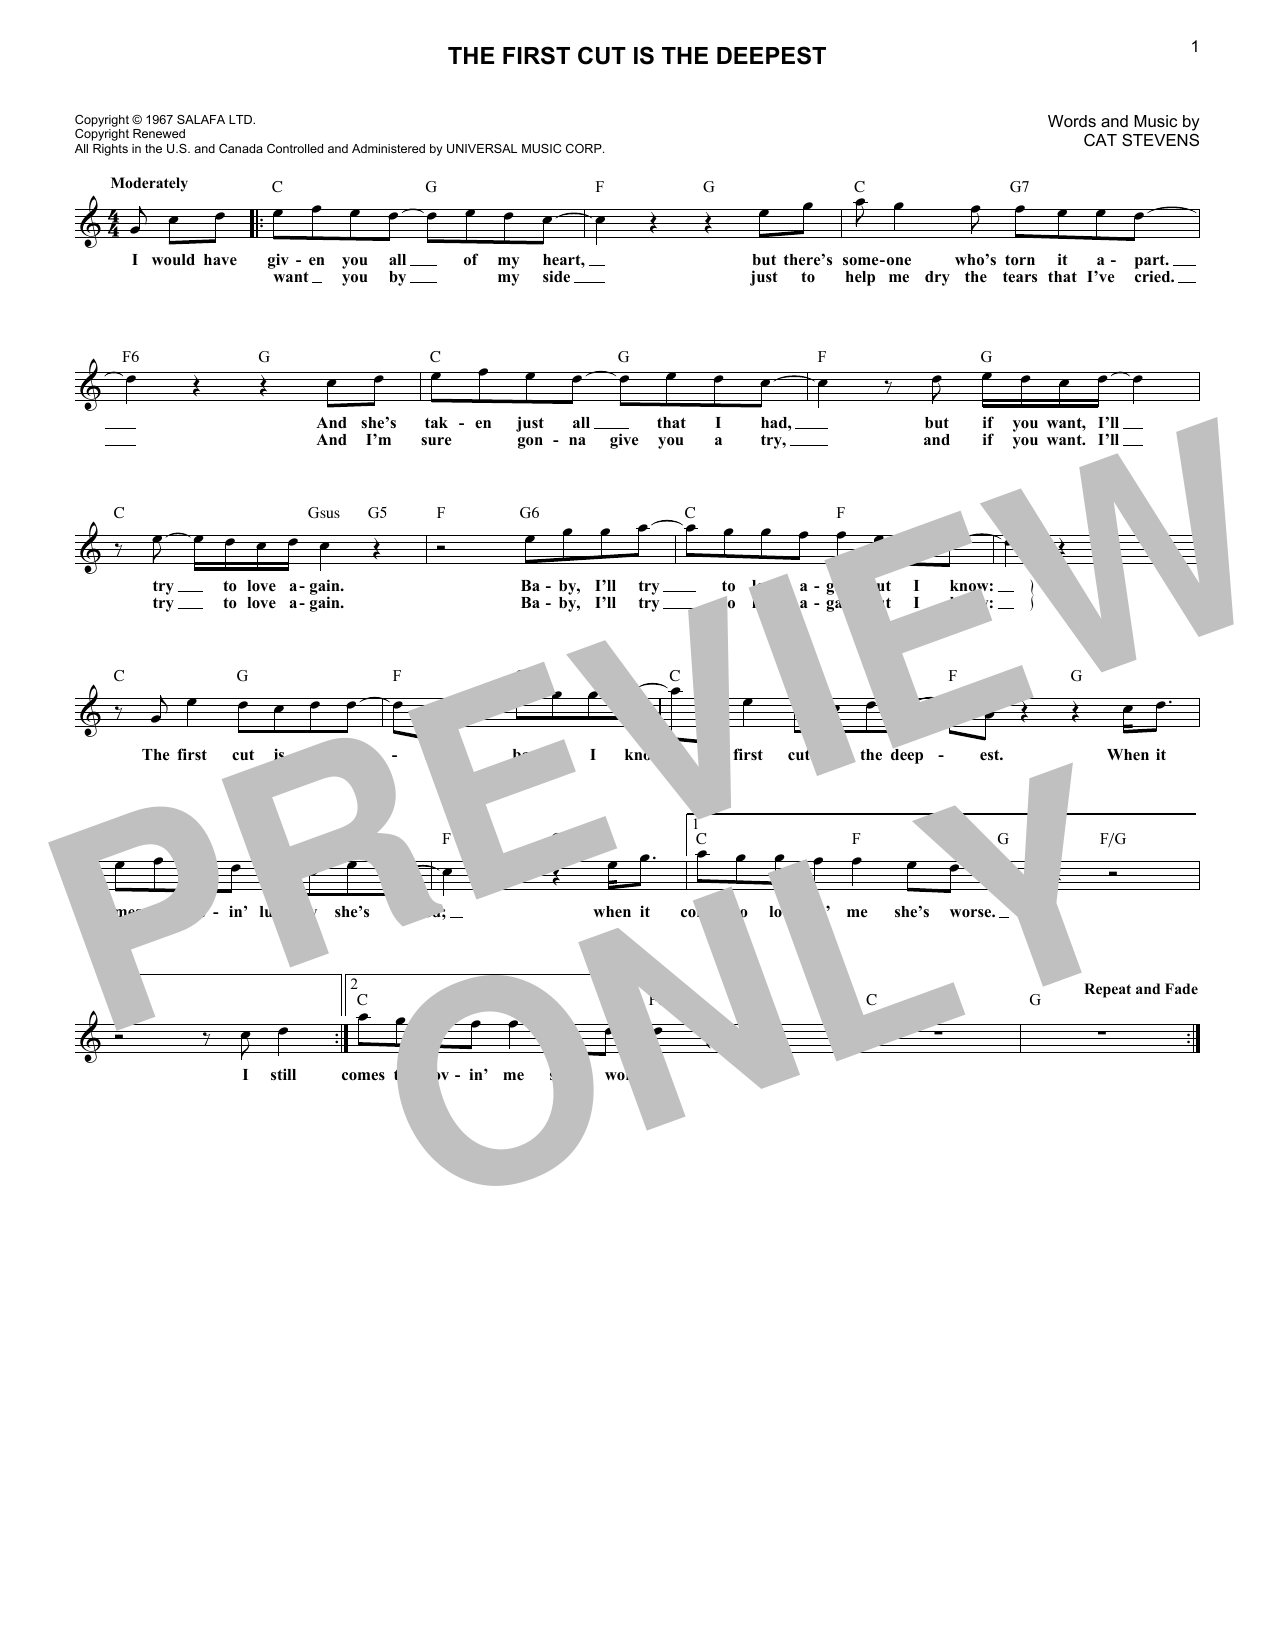 Download Cat Stevens The First Cut Is The Deepest Sheet Music